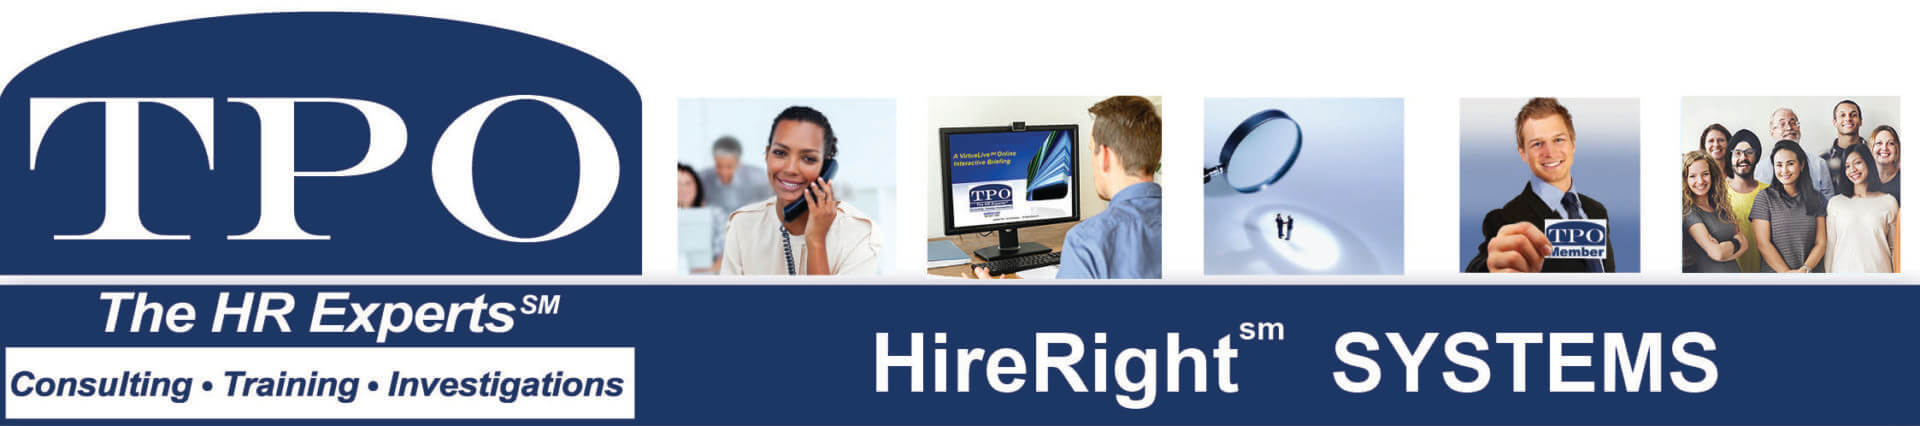 HireRight-Systems-Header-Banner-2-scaled (1)